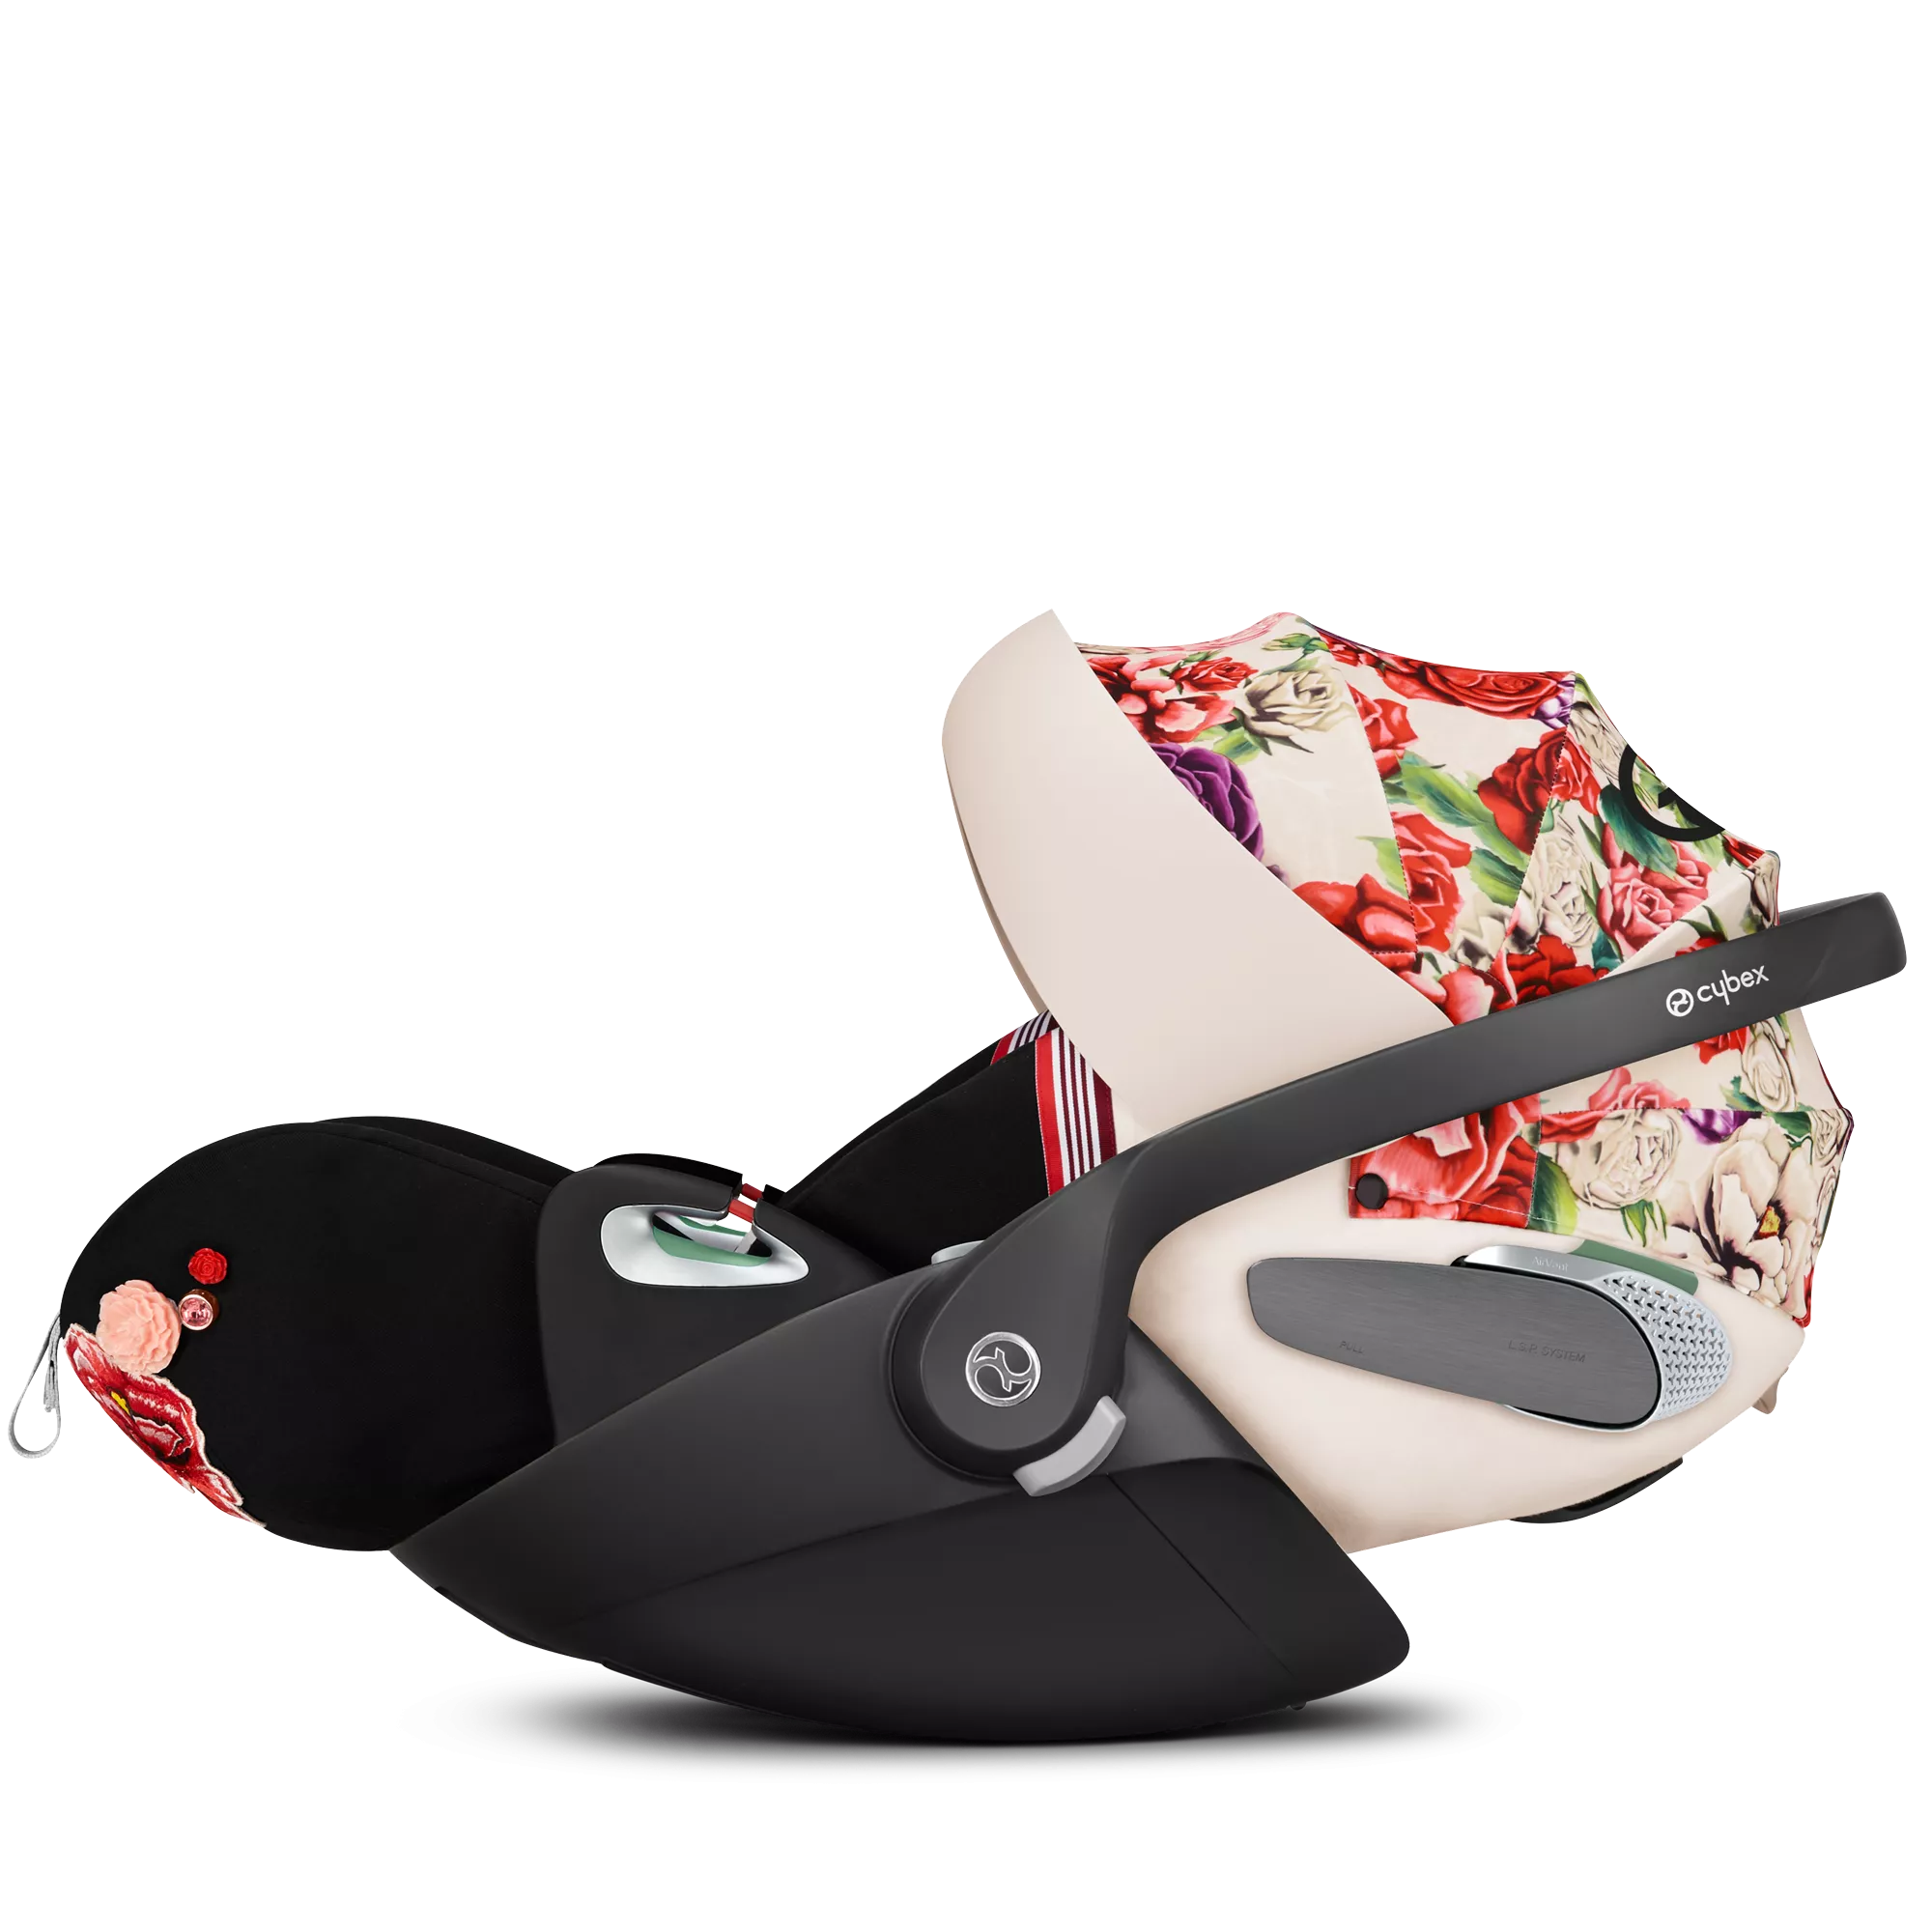 Cybex Cloud T i-Size | Spring Blossom Light - Fashion Collection